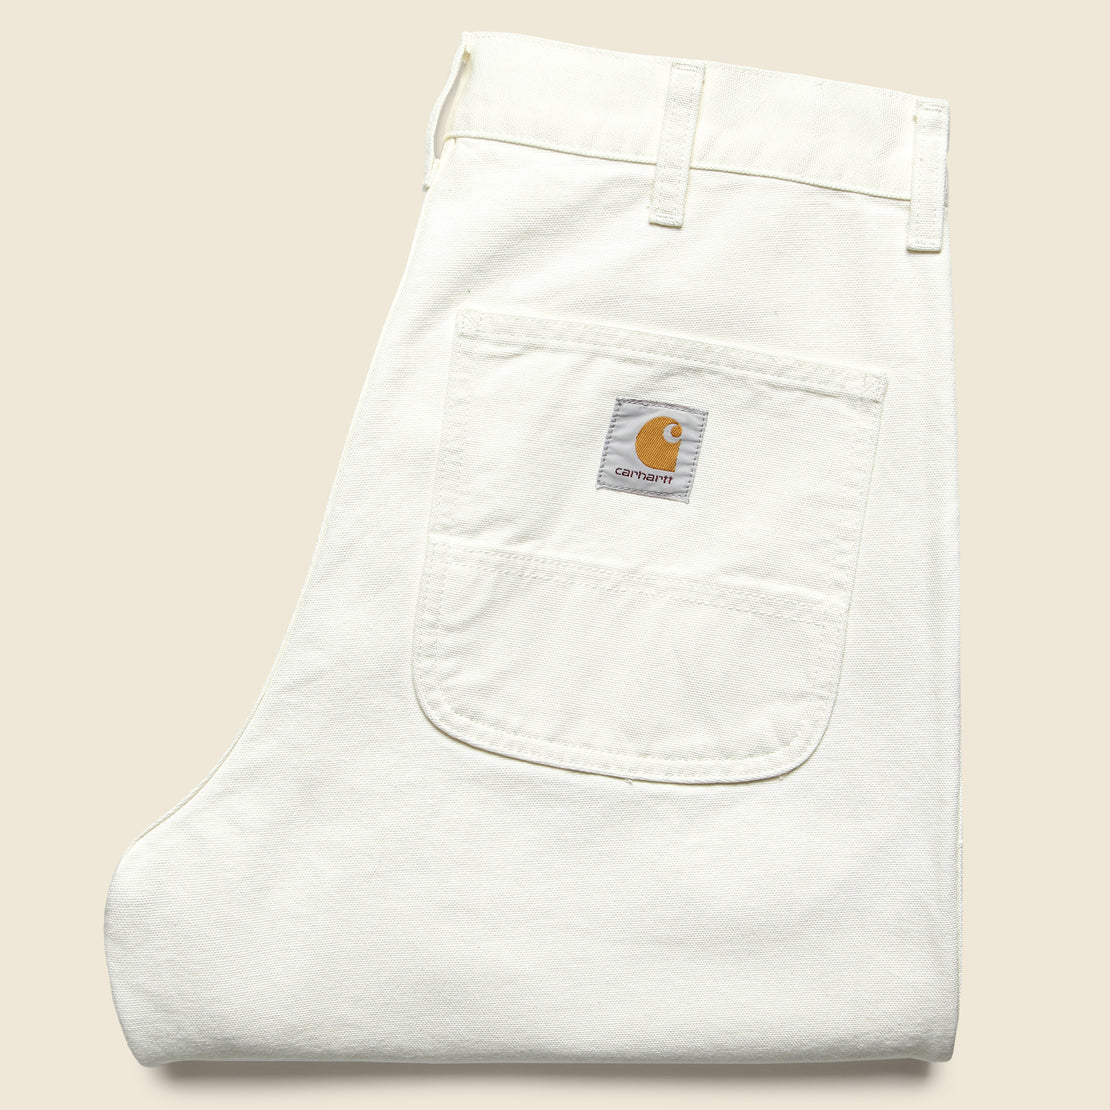 Simple Pant - Wax - Carhartt WIP - STAG Provisions - Pants - Twill